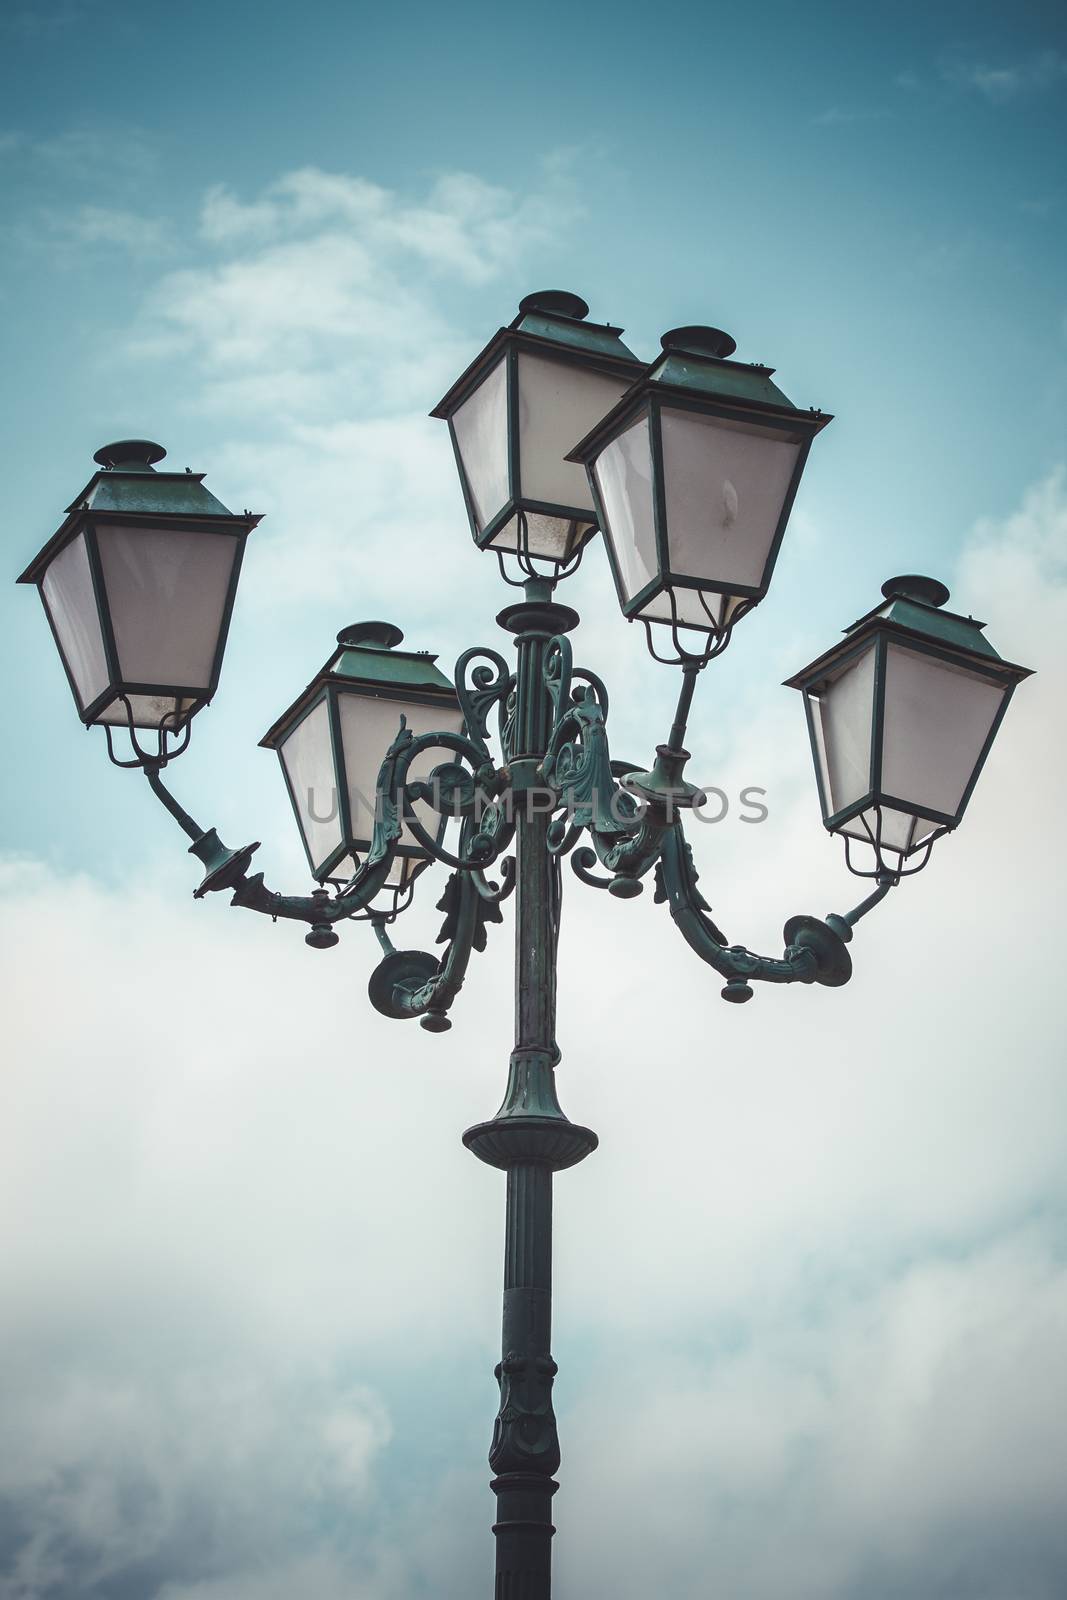 vertical, traditional street lamp with decorative metal flourishes